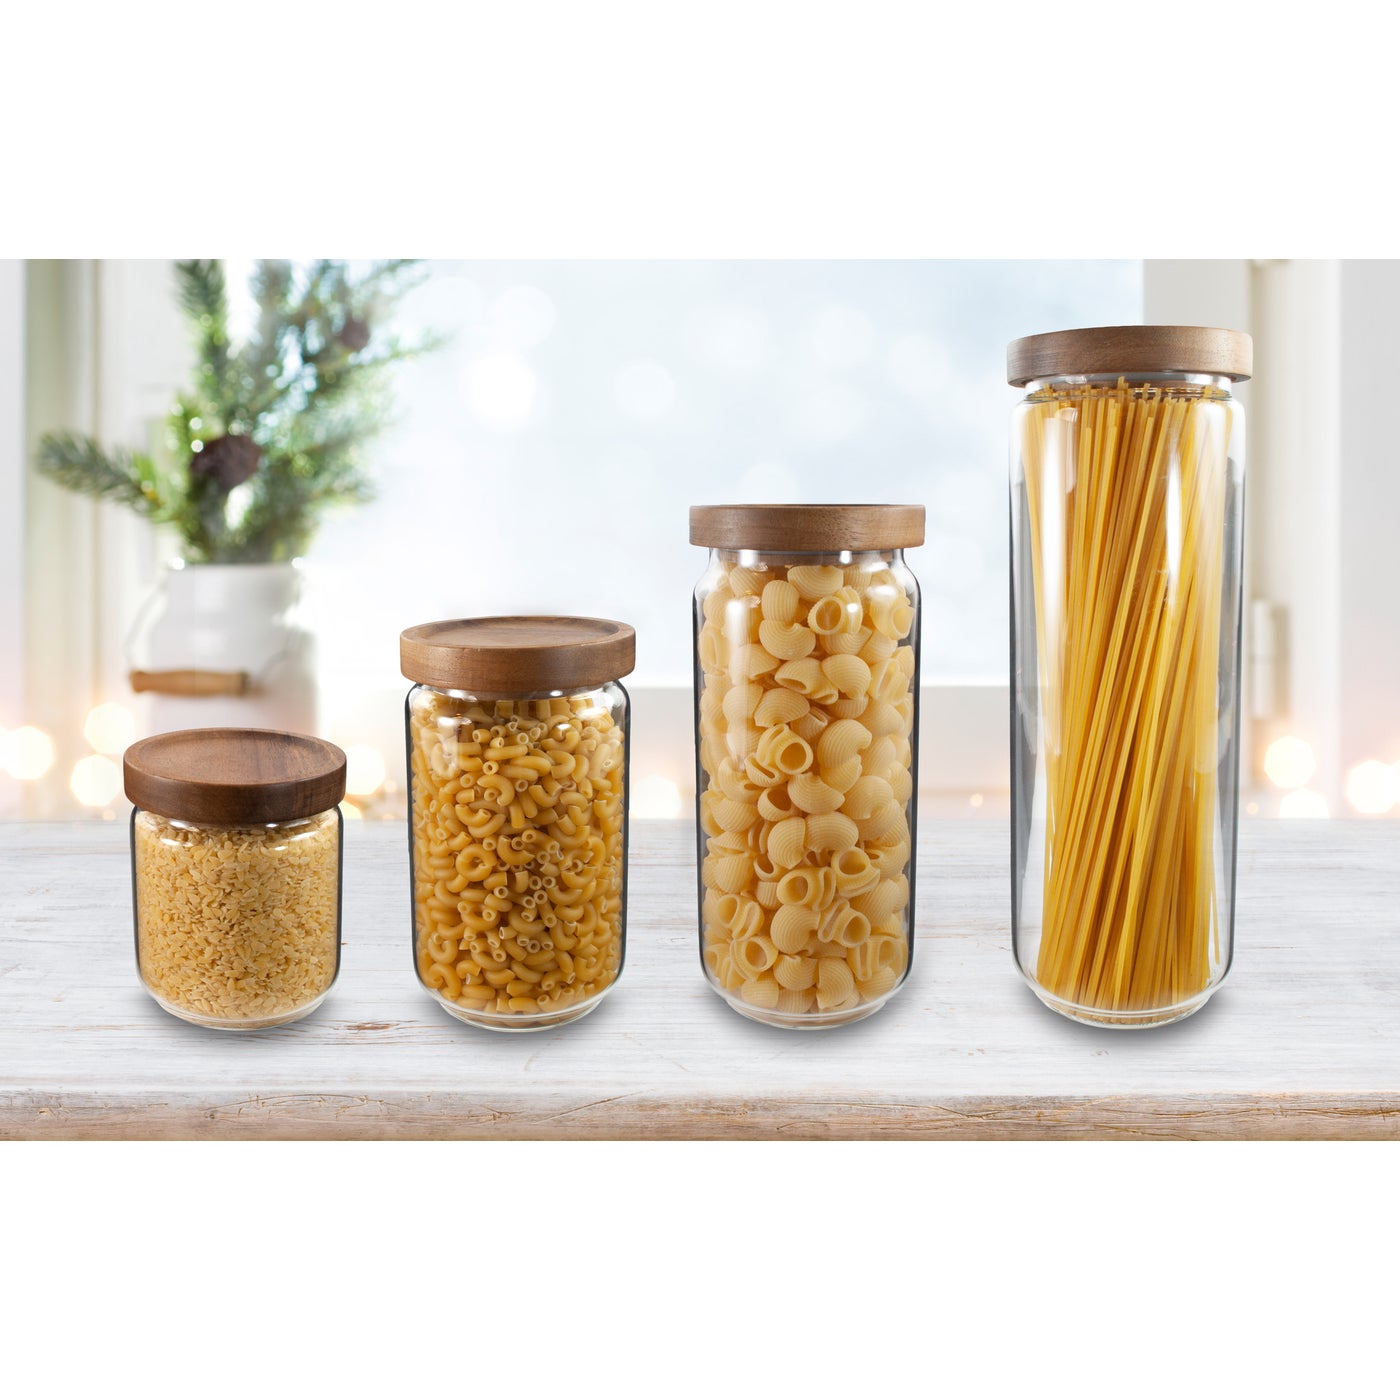 Anchor Hocking Glass Jars with Acacia Lids, Set of 3